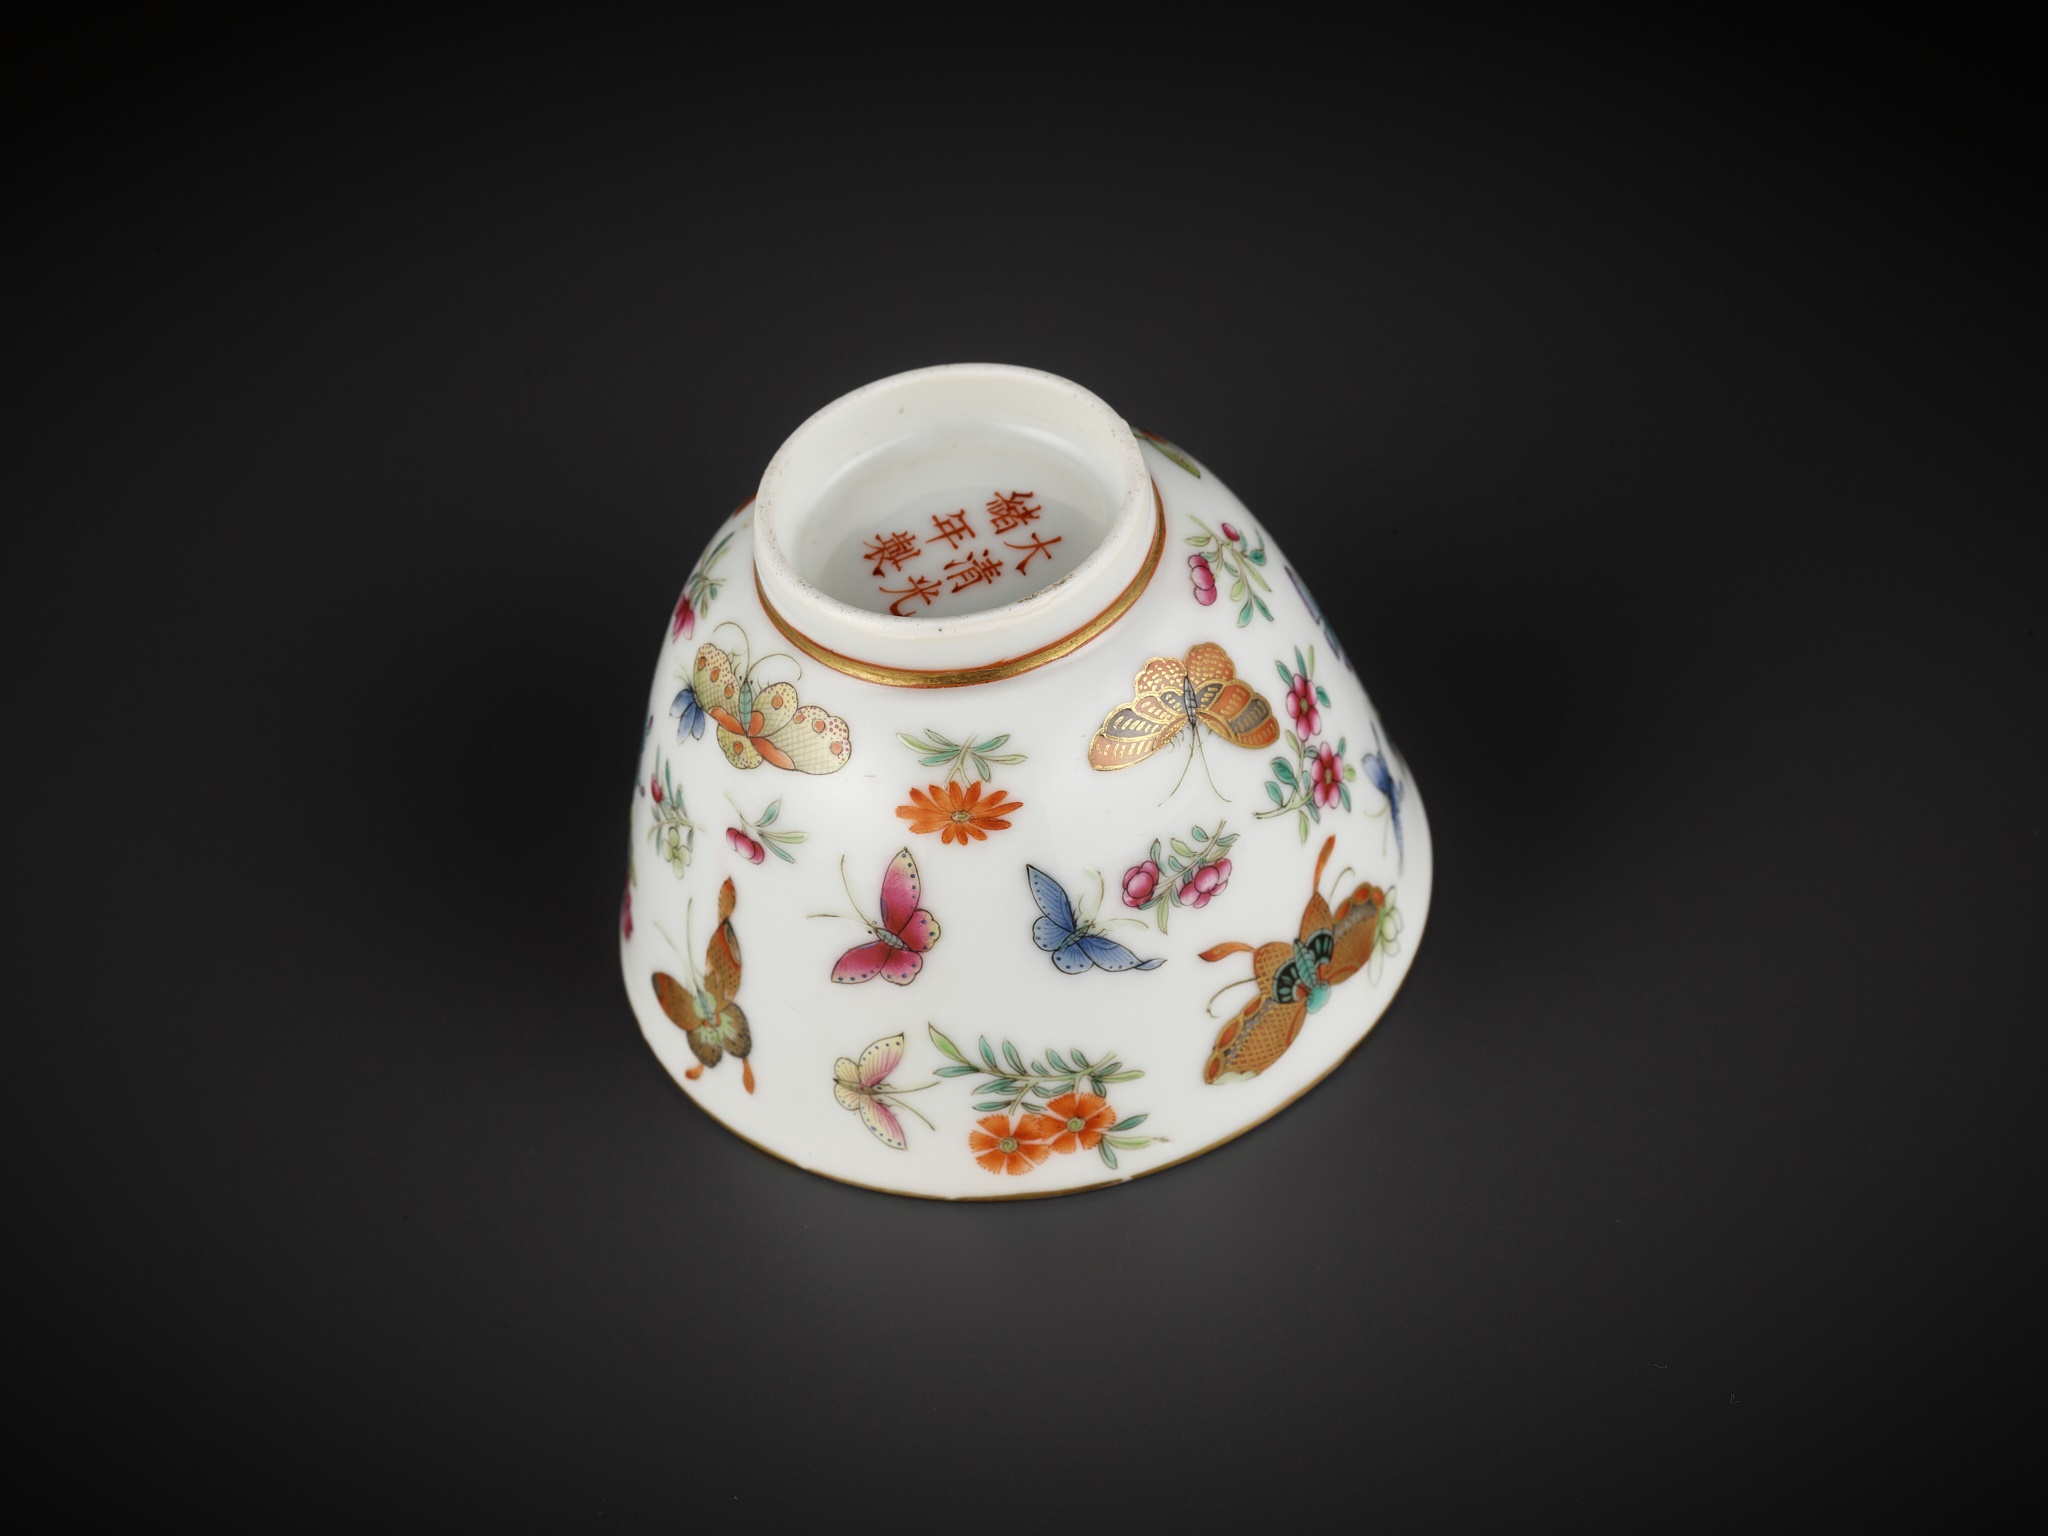 A SUPERB PAIR OF FAMILLE ROSE 'BUTTERFLY' BOWLS, GUANGXU MARKS AND PERIOD - Image 7 of 13